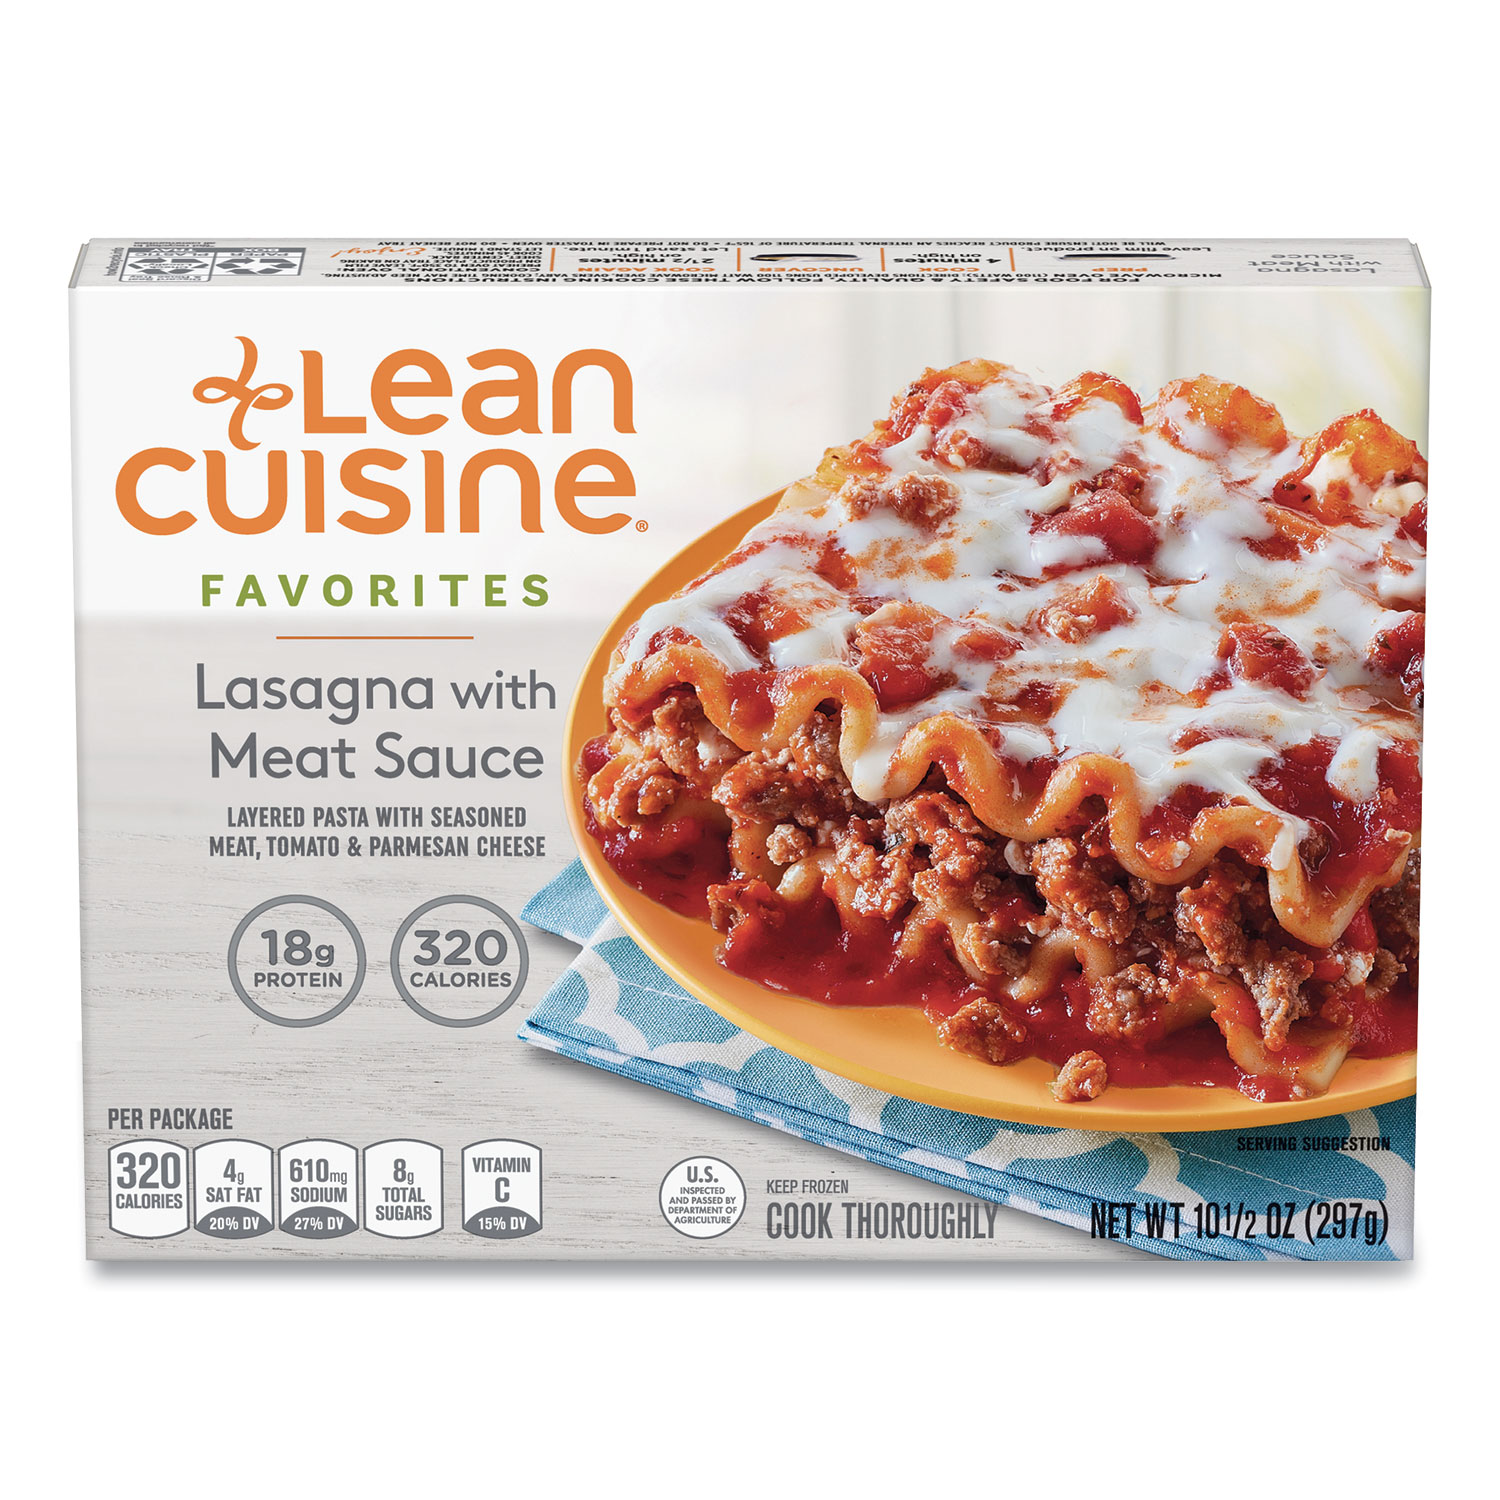  Lean Cuisine 166682 Favorites Lasagna with Meat Sauce, 10.5 oz Box, 3 Boxes/Pack, Free Delivery in 1-4 Business Days (GRR90300127) 